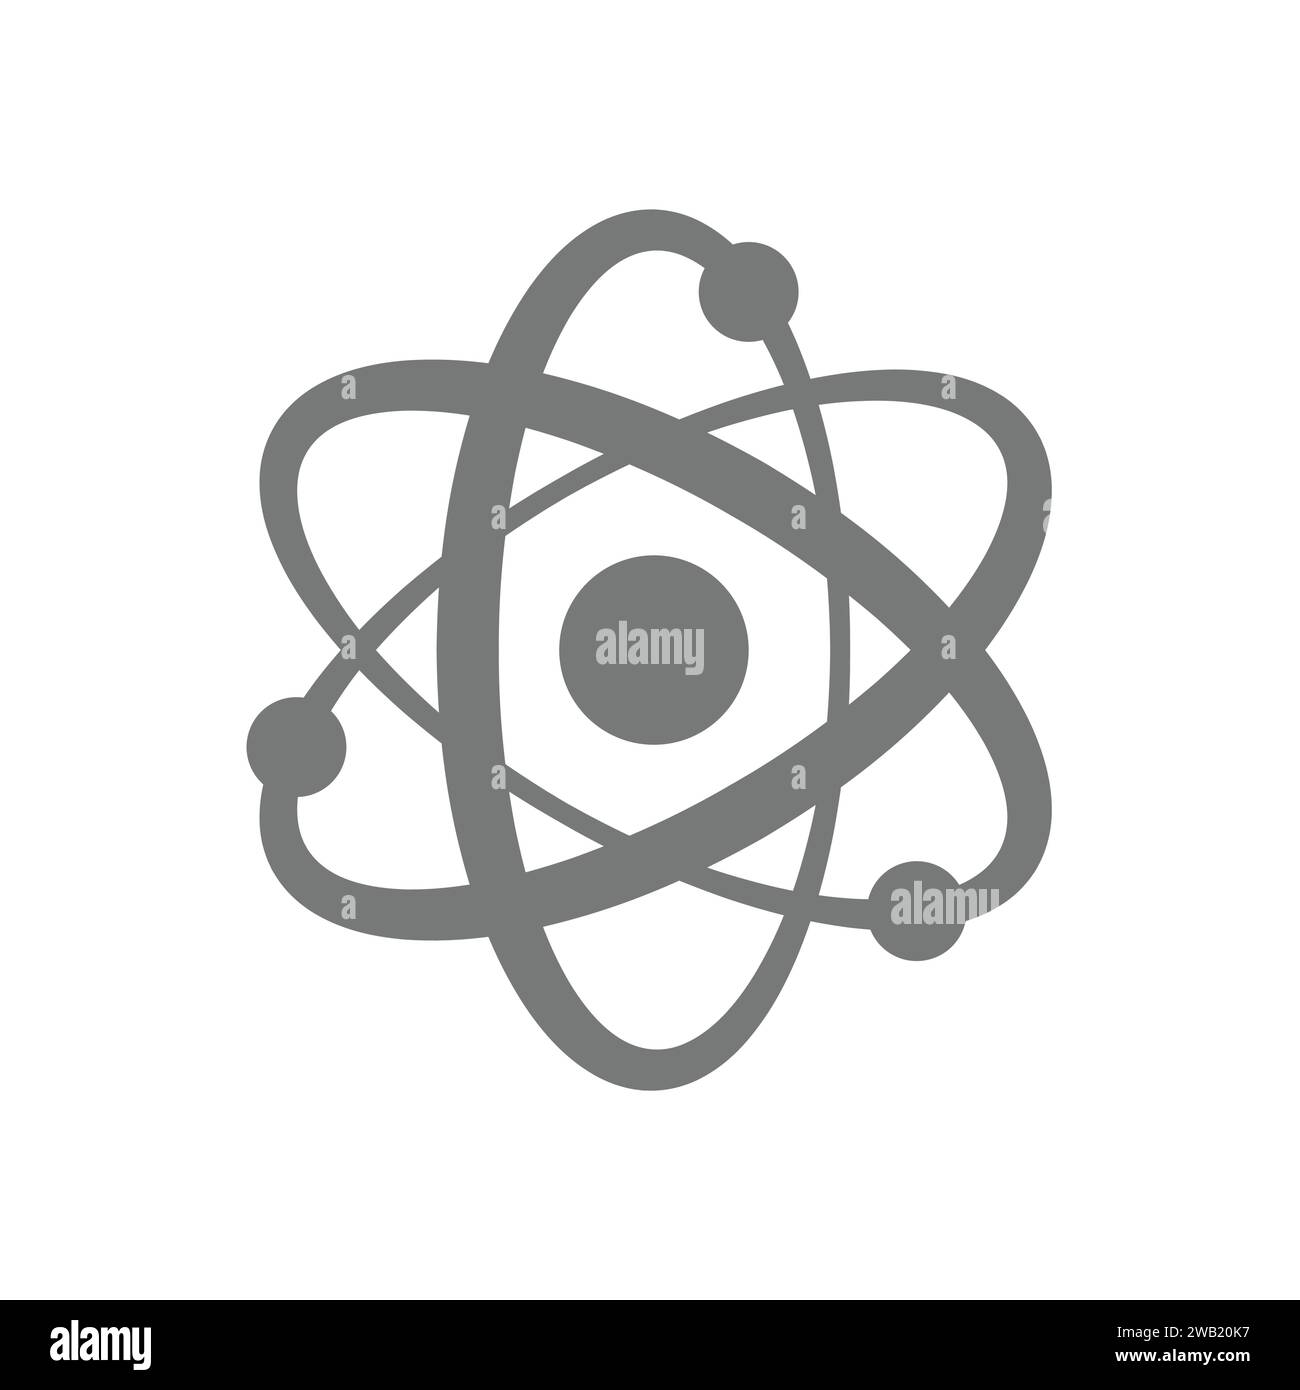 Atom vector icon. Atomic structure simple symbol. Stock Vector